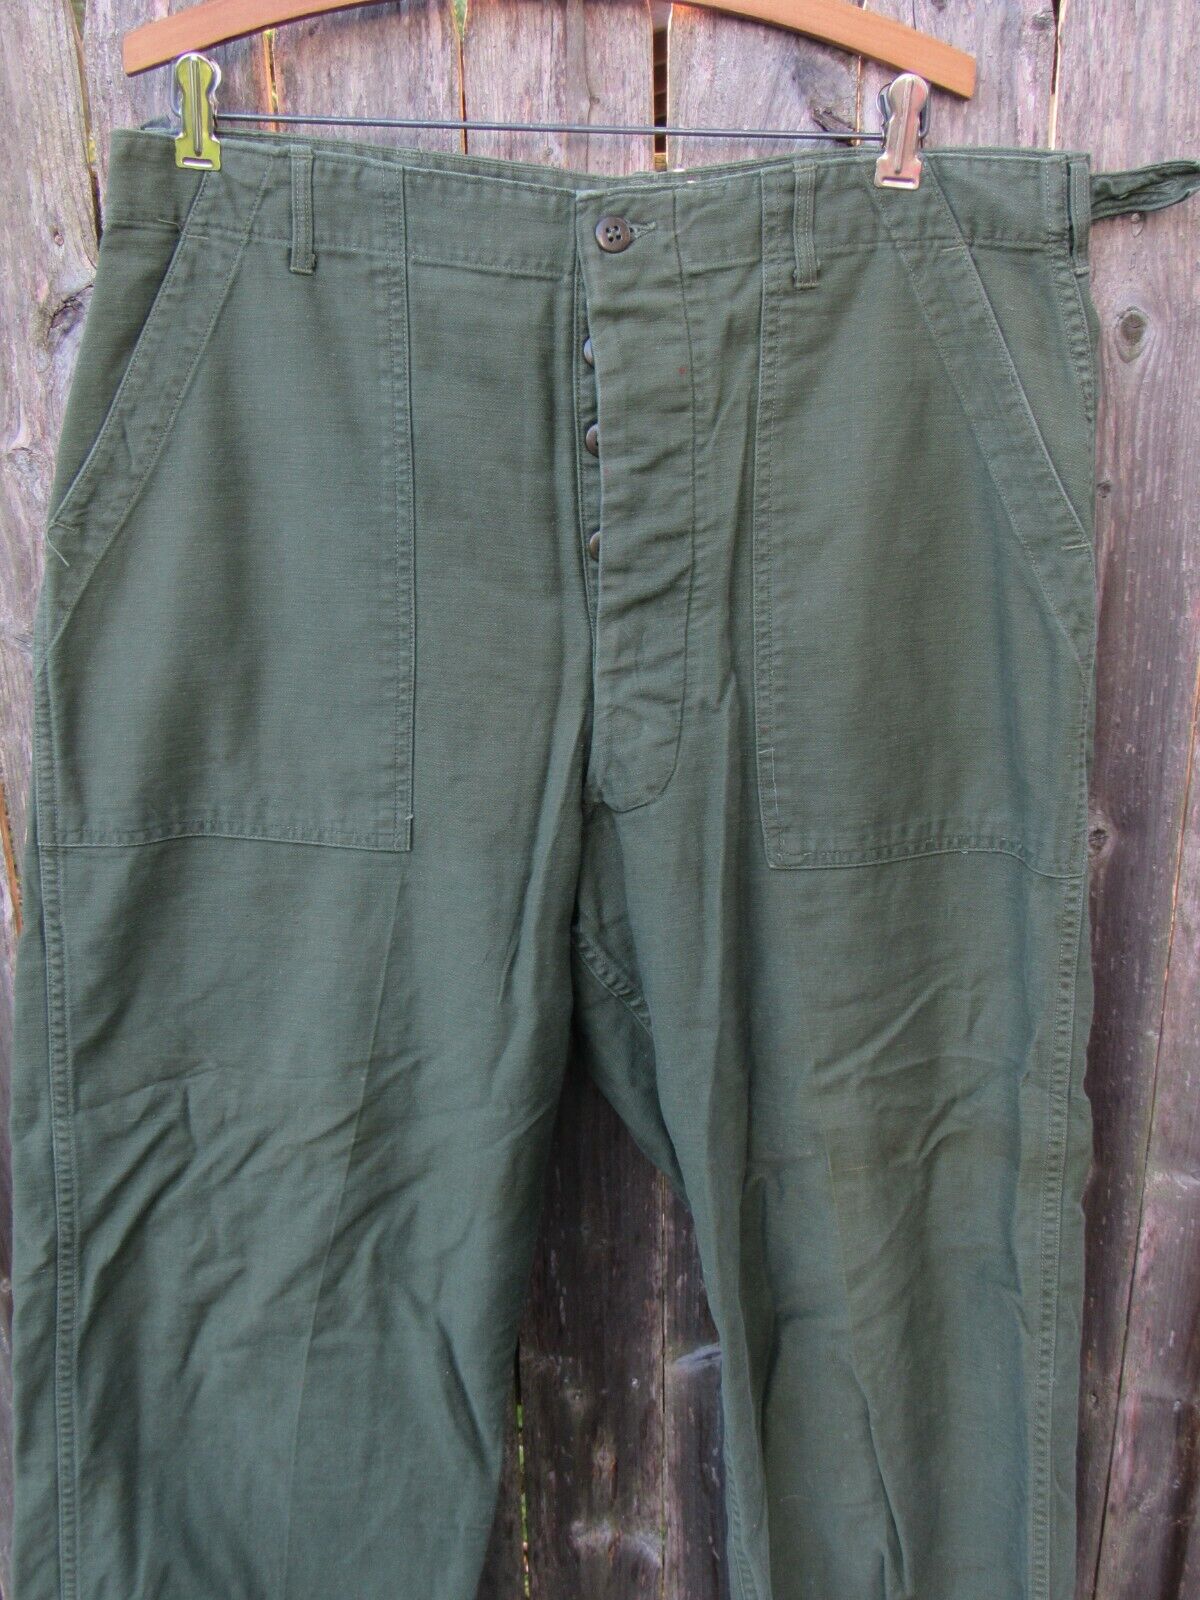 Vtg 1950s OG 107 Trouser 36x28.5 Military US Army Utility Pant 50s Cotton Sateen